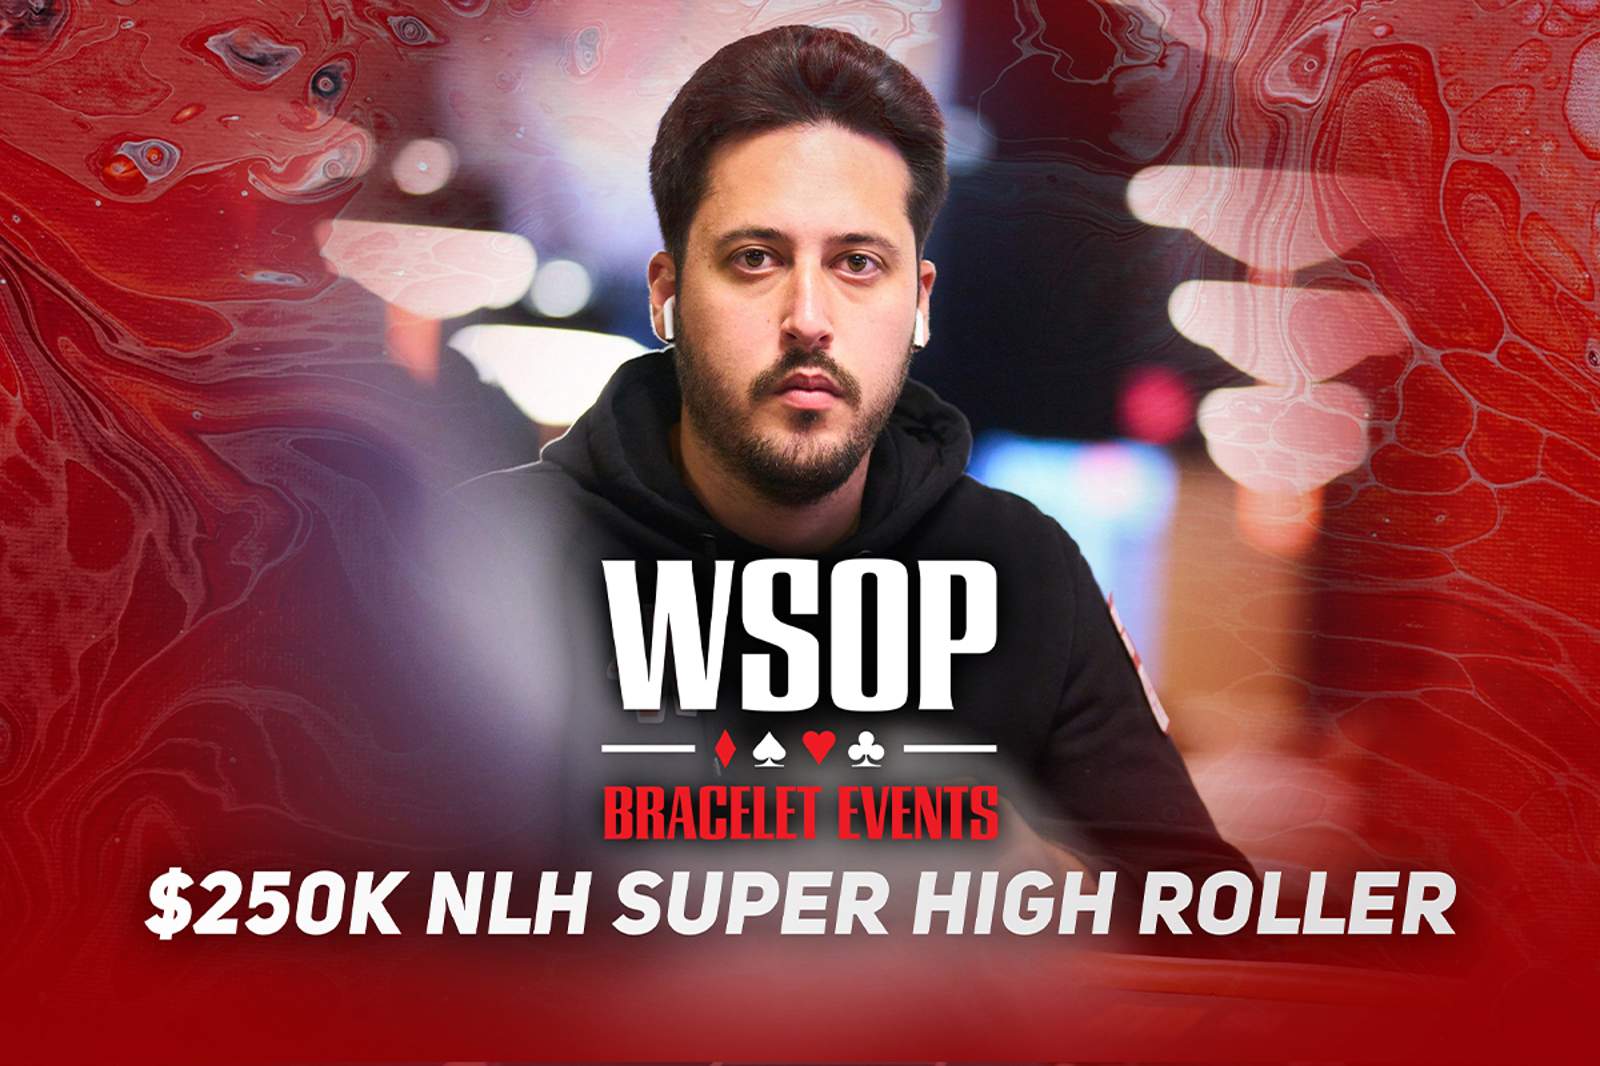 Watch the WSOP Event #82: $250K Super High Roller Final Table on PokerGO.com at 8 p.m. ET